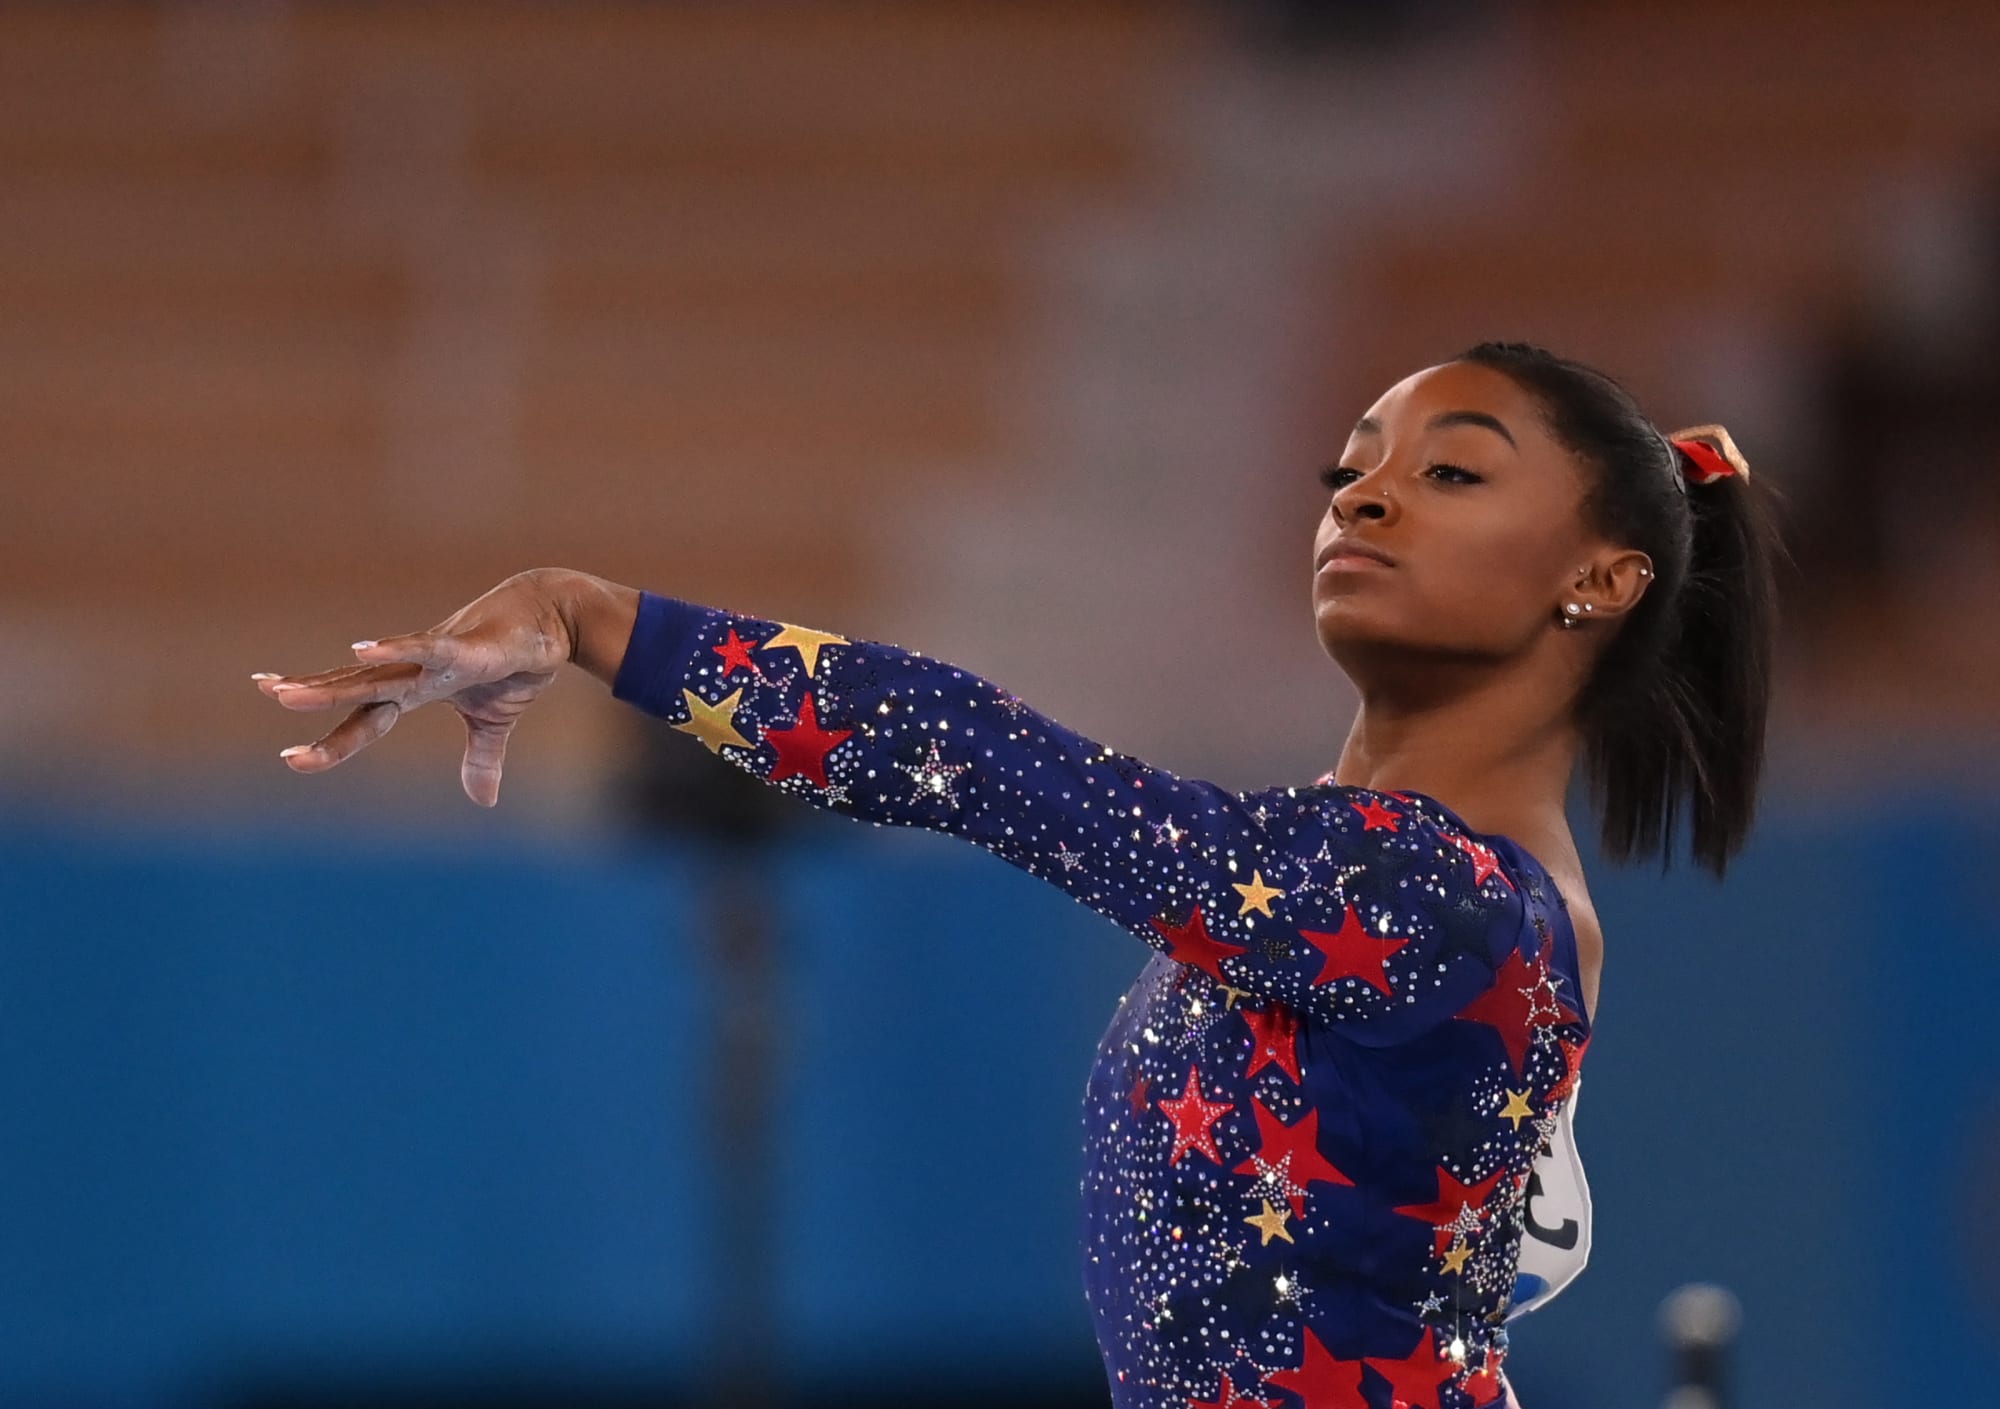 Watch Simone Biles absolutely destroy the floor routine at 2021